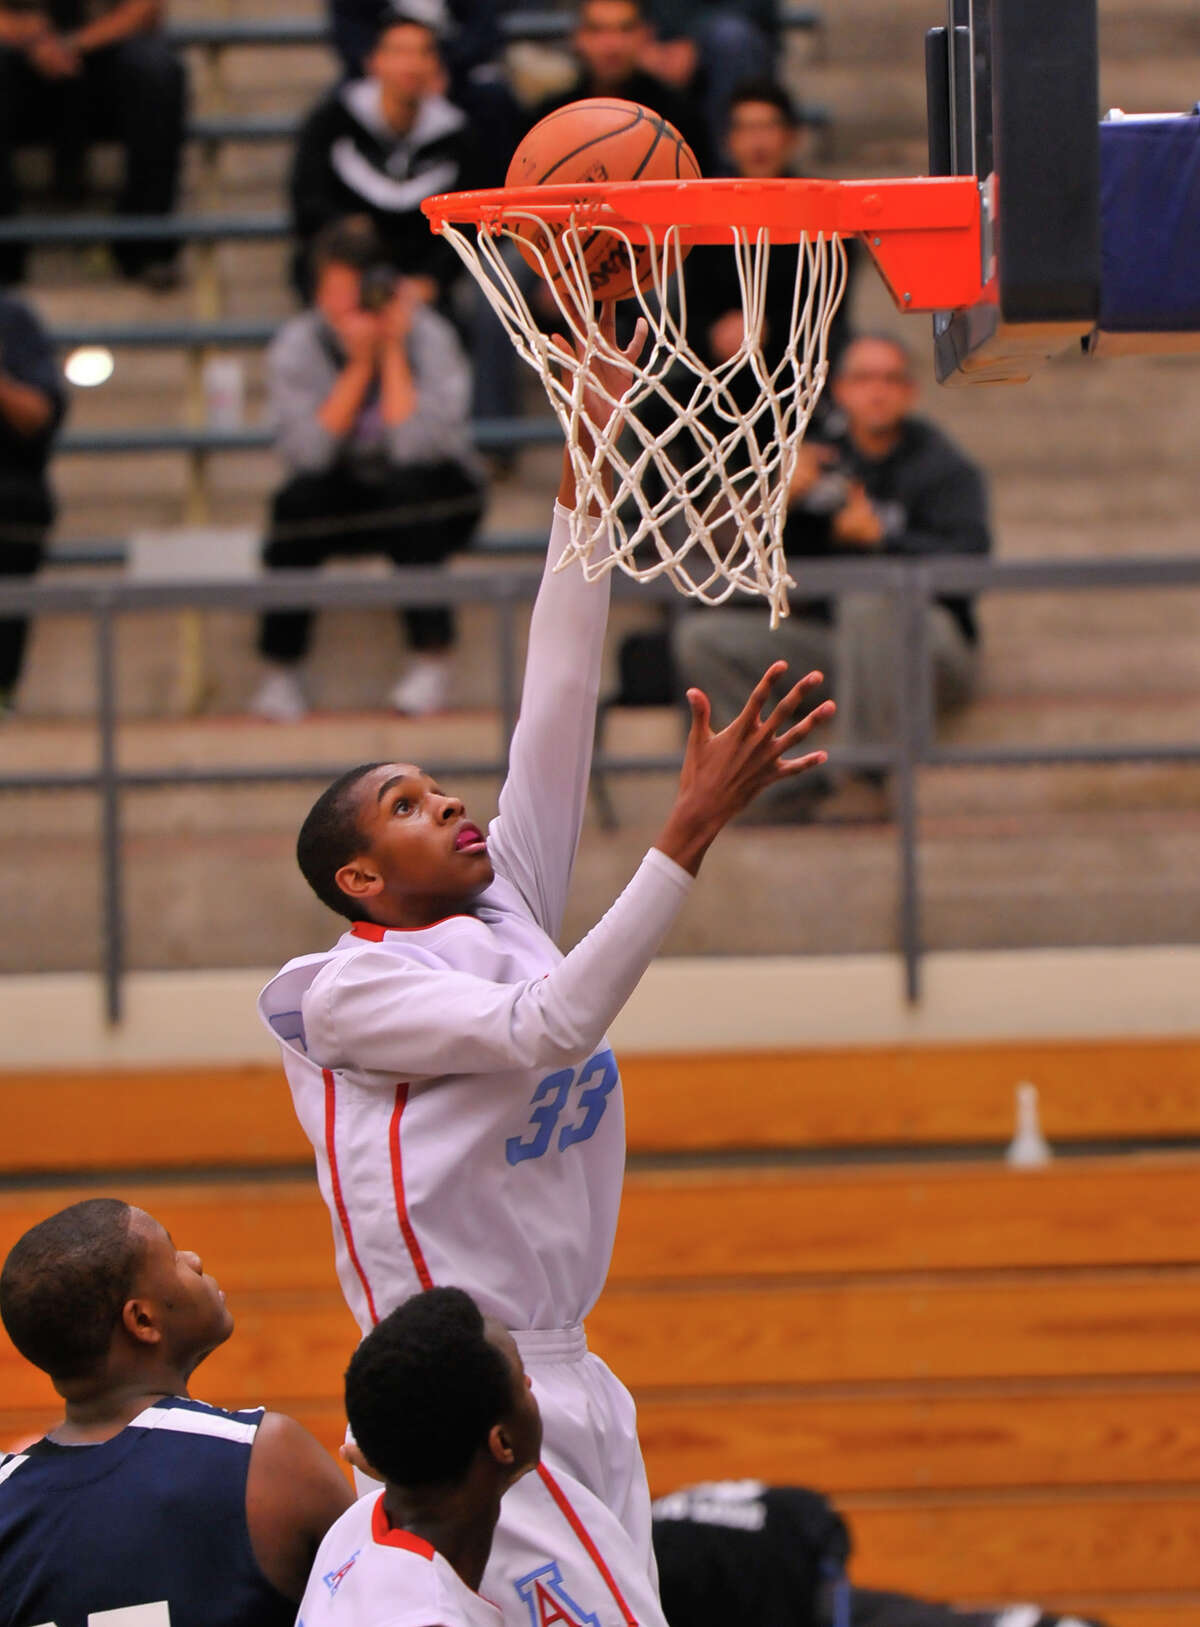 Antonian's Jamel Bradley scores two points in a Feb. 6, 2014 game vs. Central Catholic. The Buttons won 66-55.